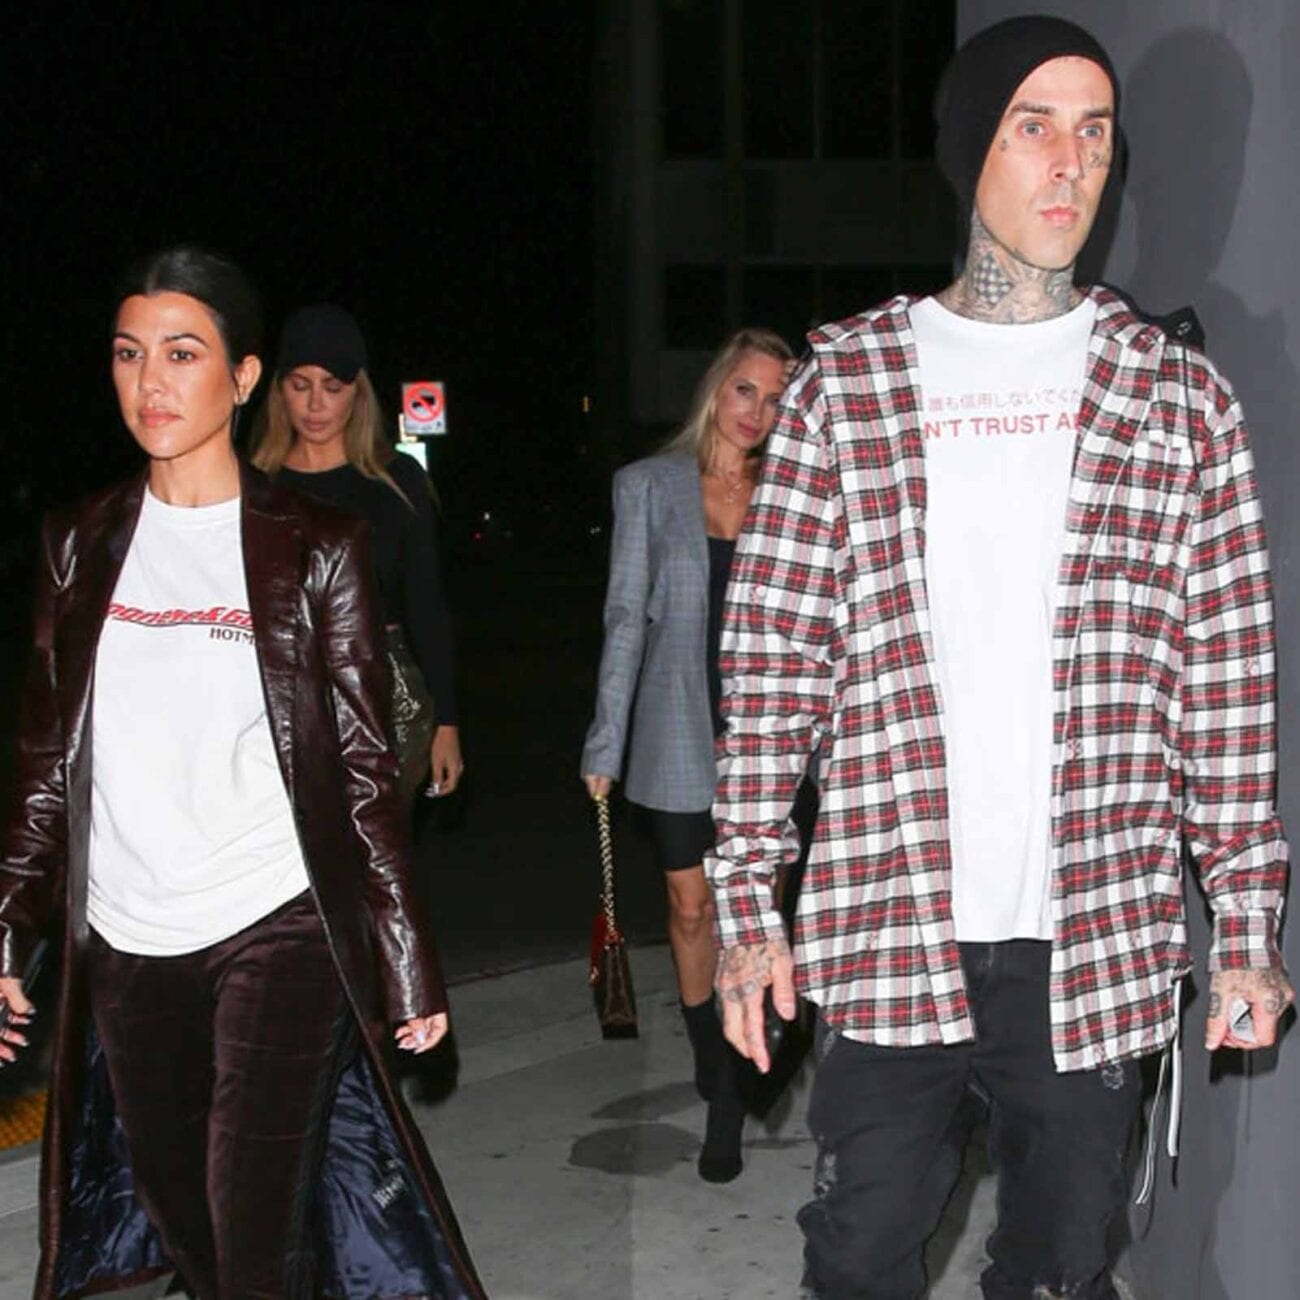 The internet thinks Kourtney Kardashian has a new boyfriend and they're excited about the prospect. Here's why they think she's dating Travis Barker.